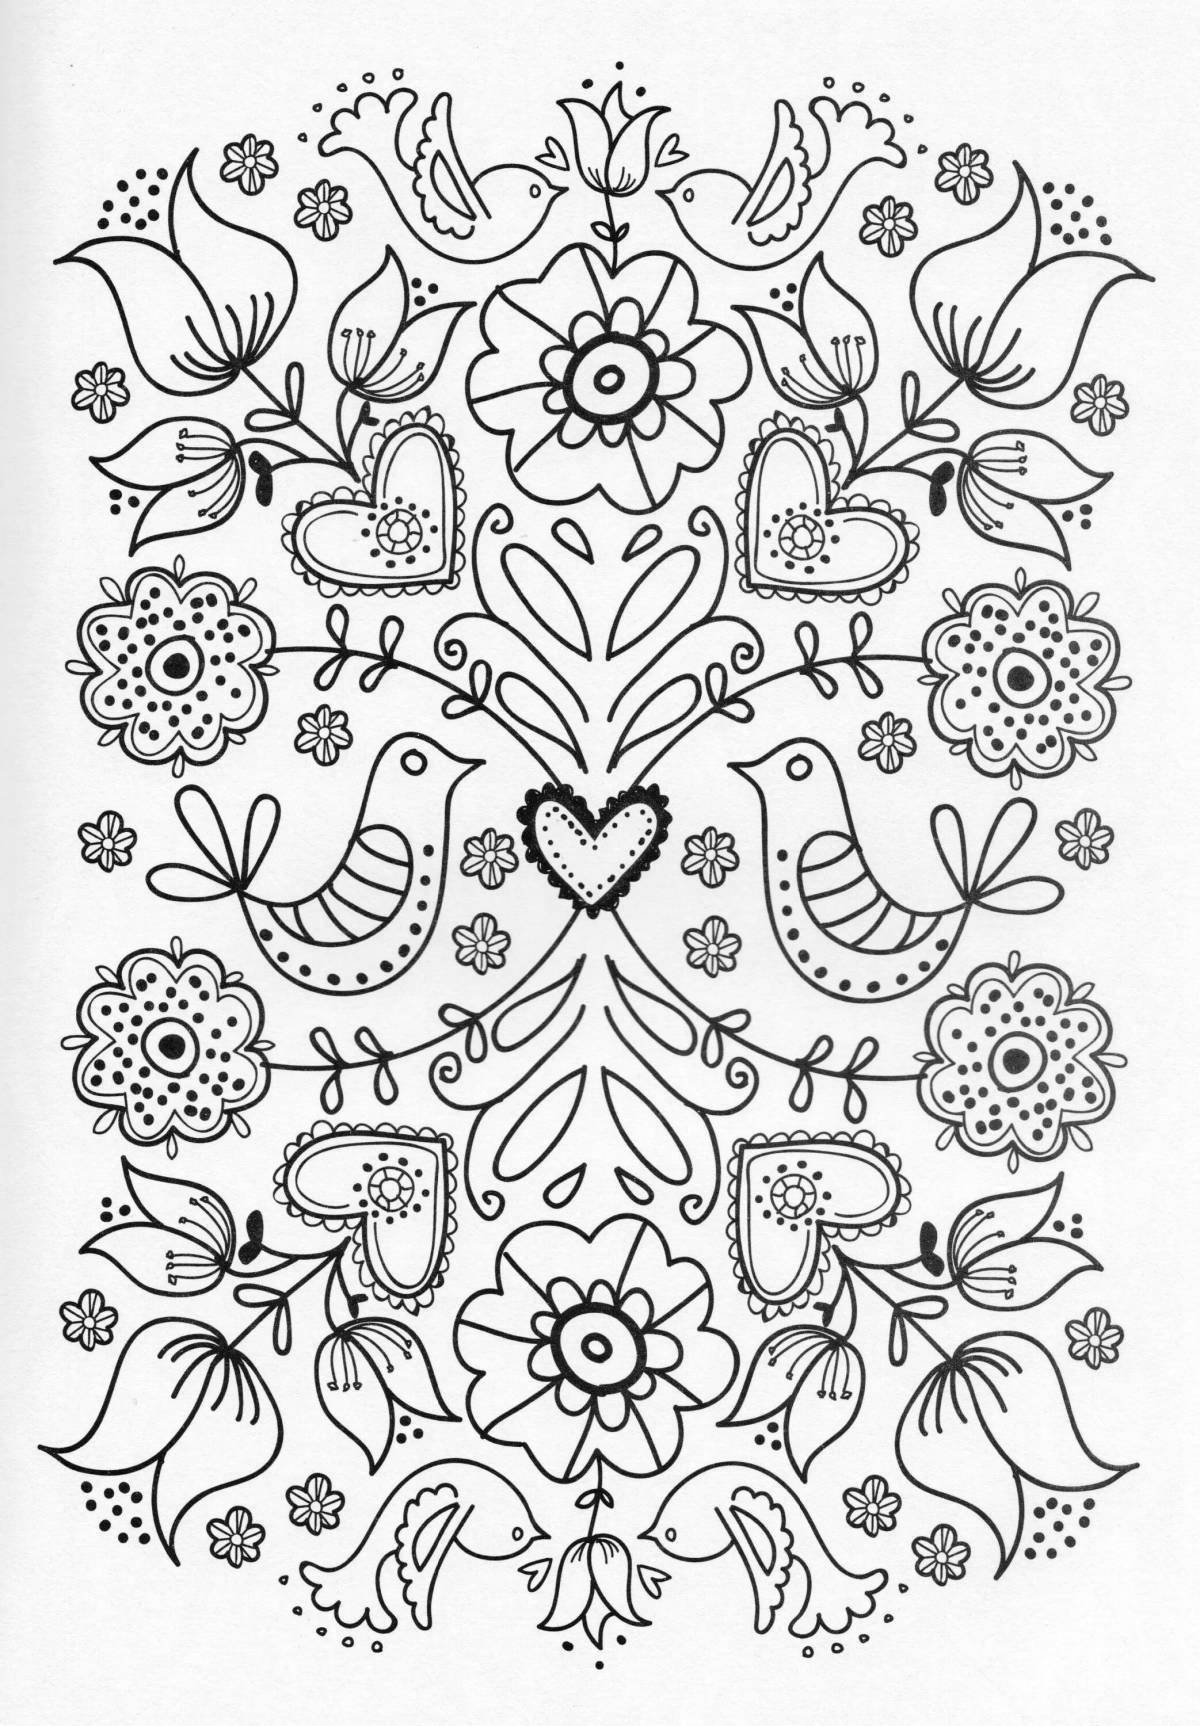 Coloring page graceful floral ornament